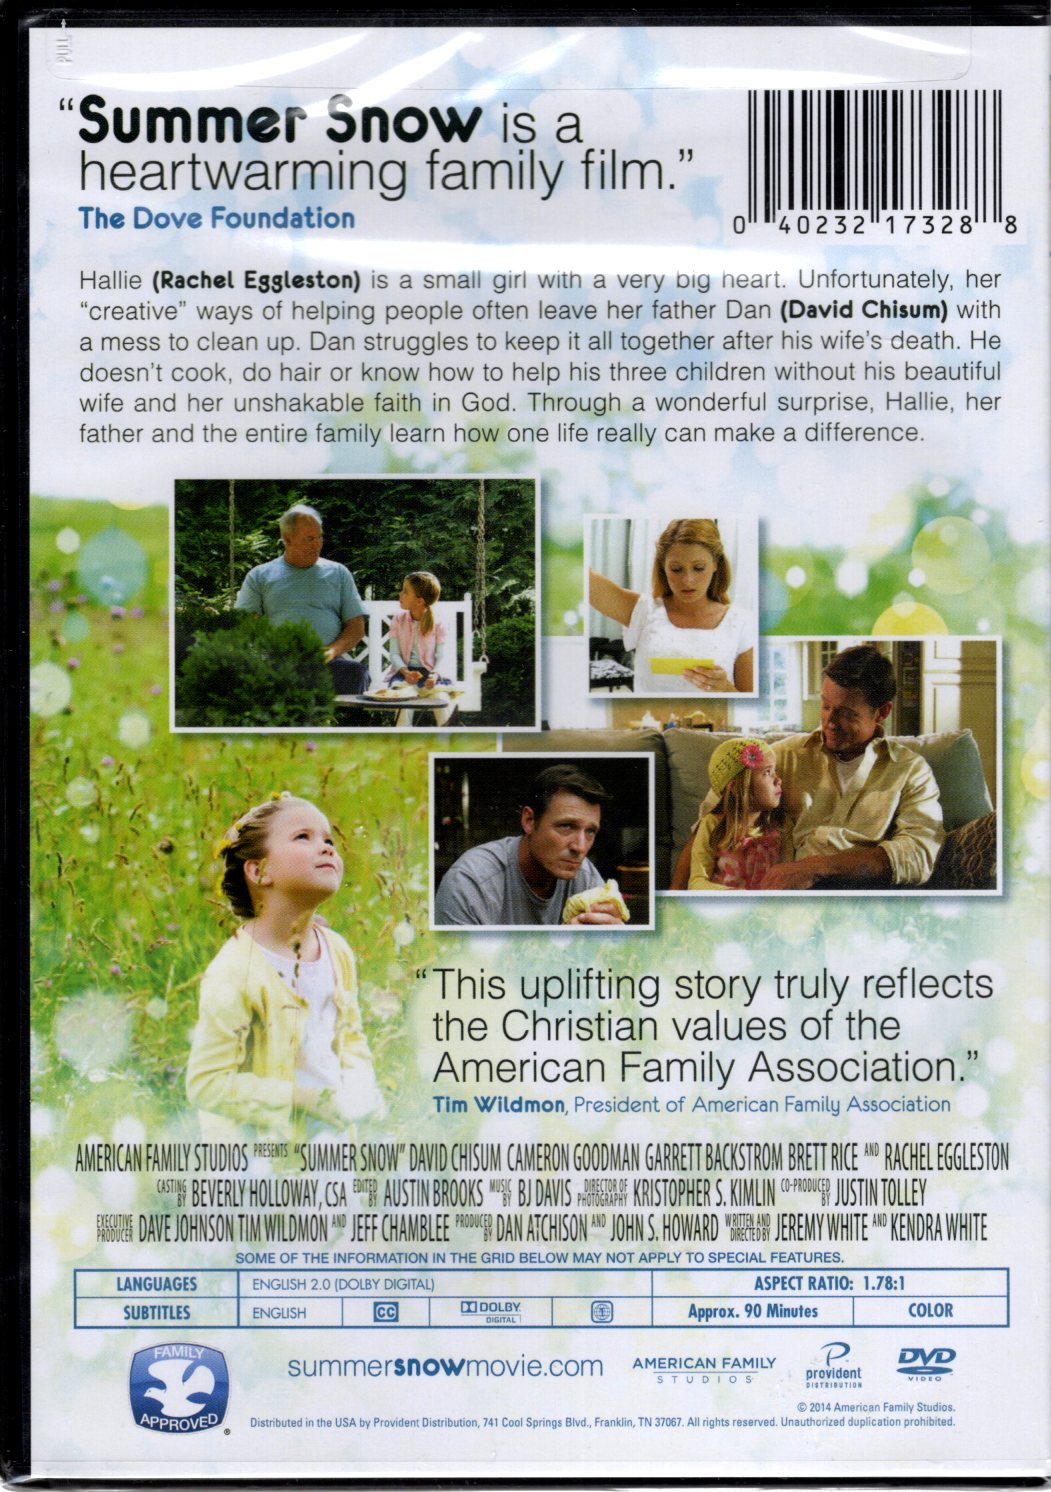 American Family Studios - Summer Snow: One Life Can Make a Difference - DVD, Movie